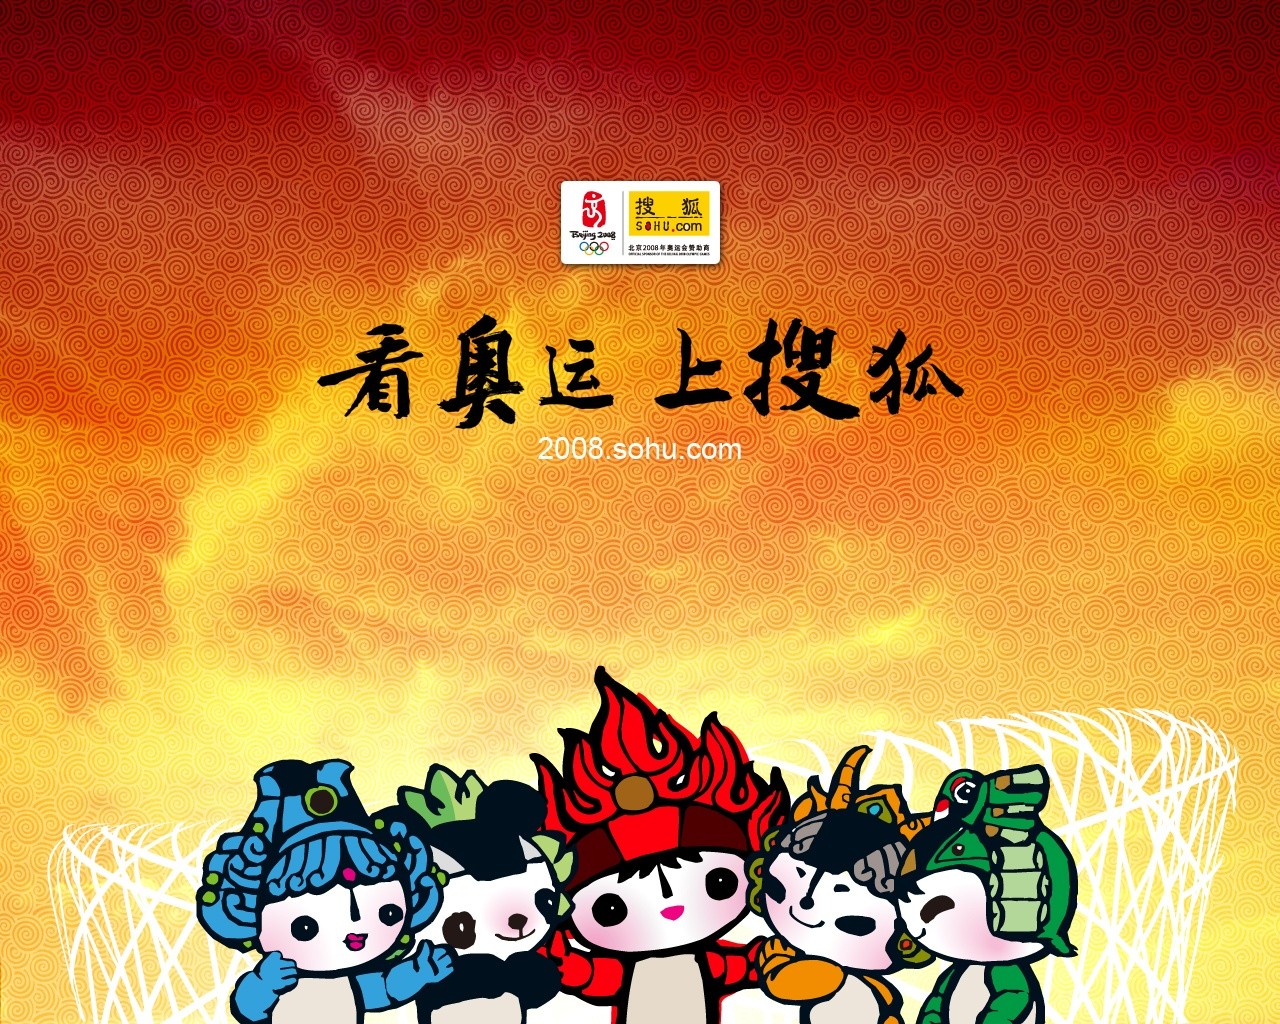 08 Olympic Games Fuwa Wallpapers #1 - 1280x1024